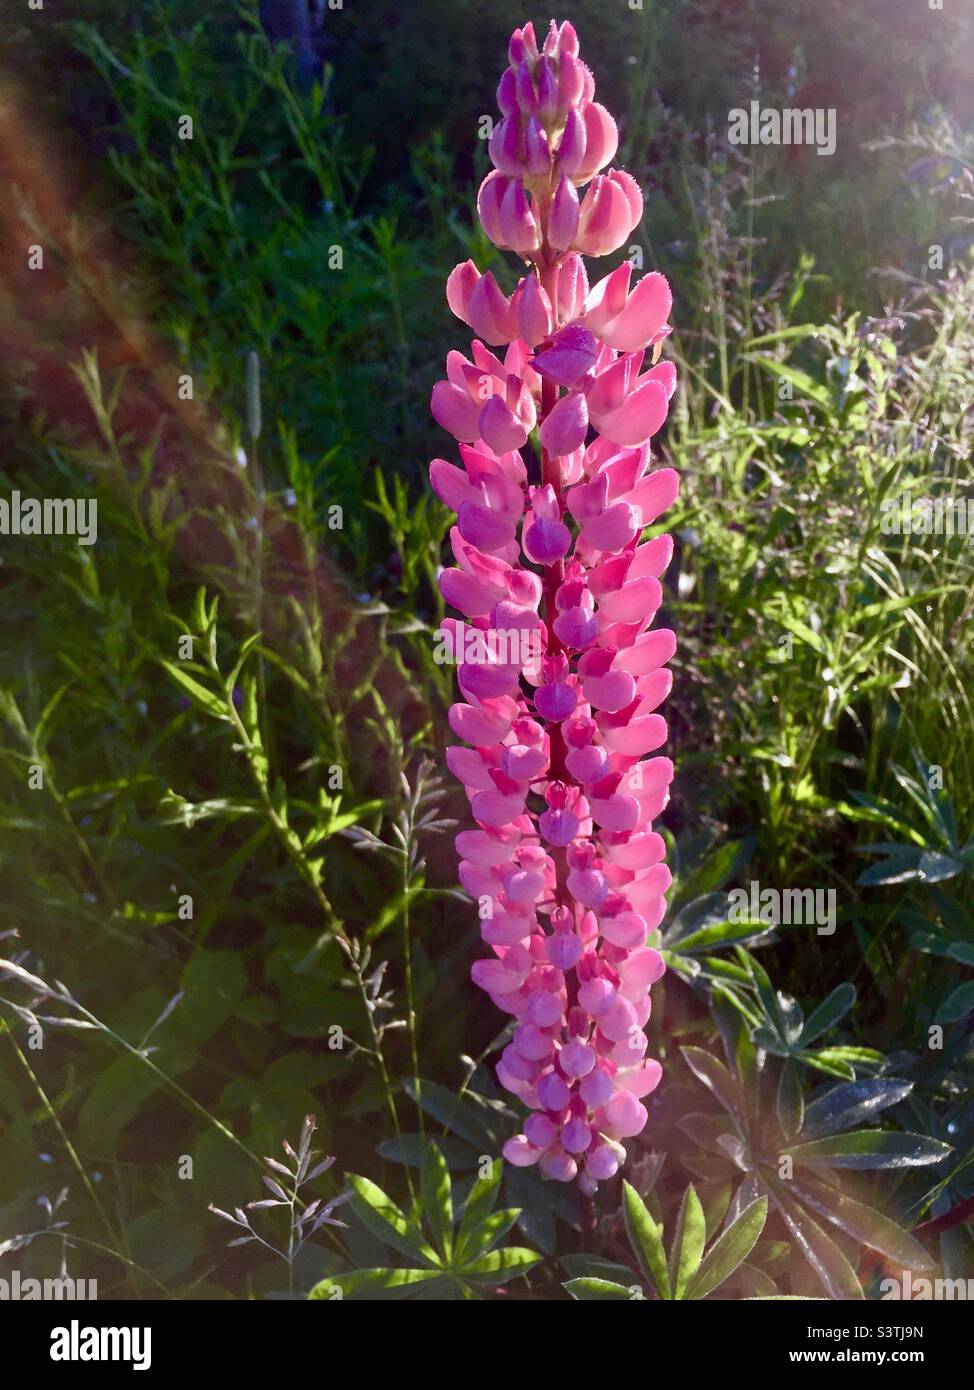 Pristine lupines stalk in a woodland setting. Nova Scotia, Canada. Natural habitat wild flower.  No human tending. Concepts: standing tall, beautiful by nature, nuanced. Stock Photo